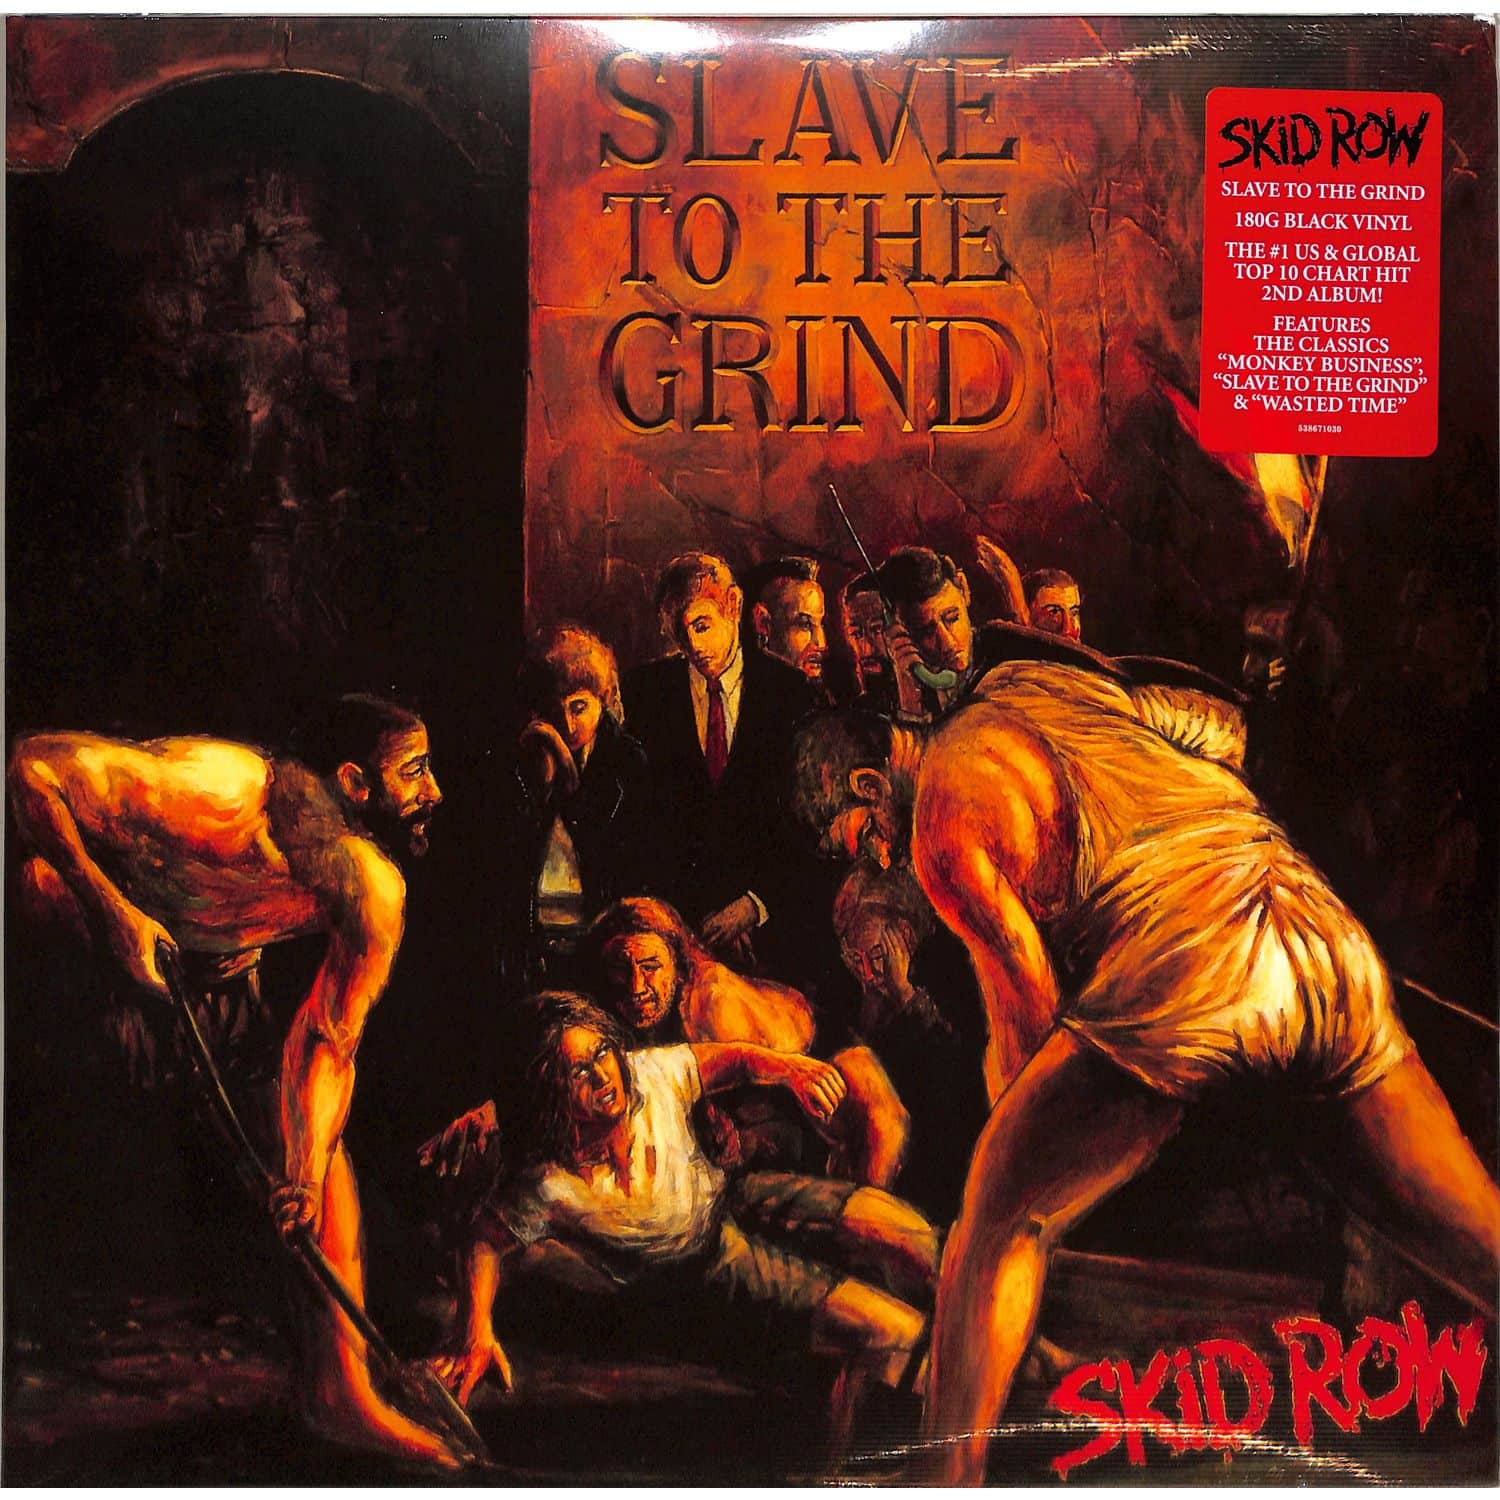 Skid Row - SLAVE TO THE GRIND 